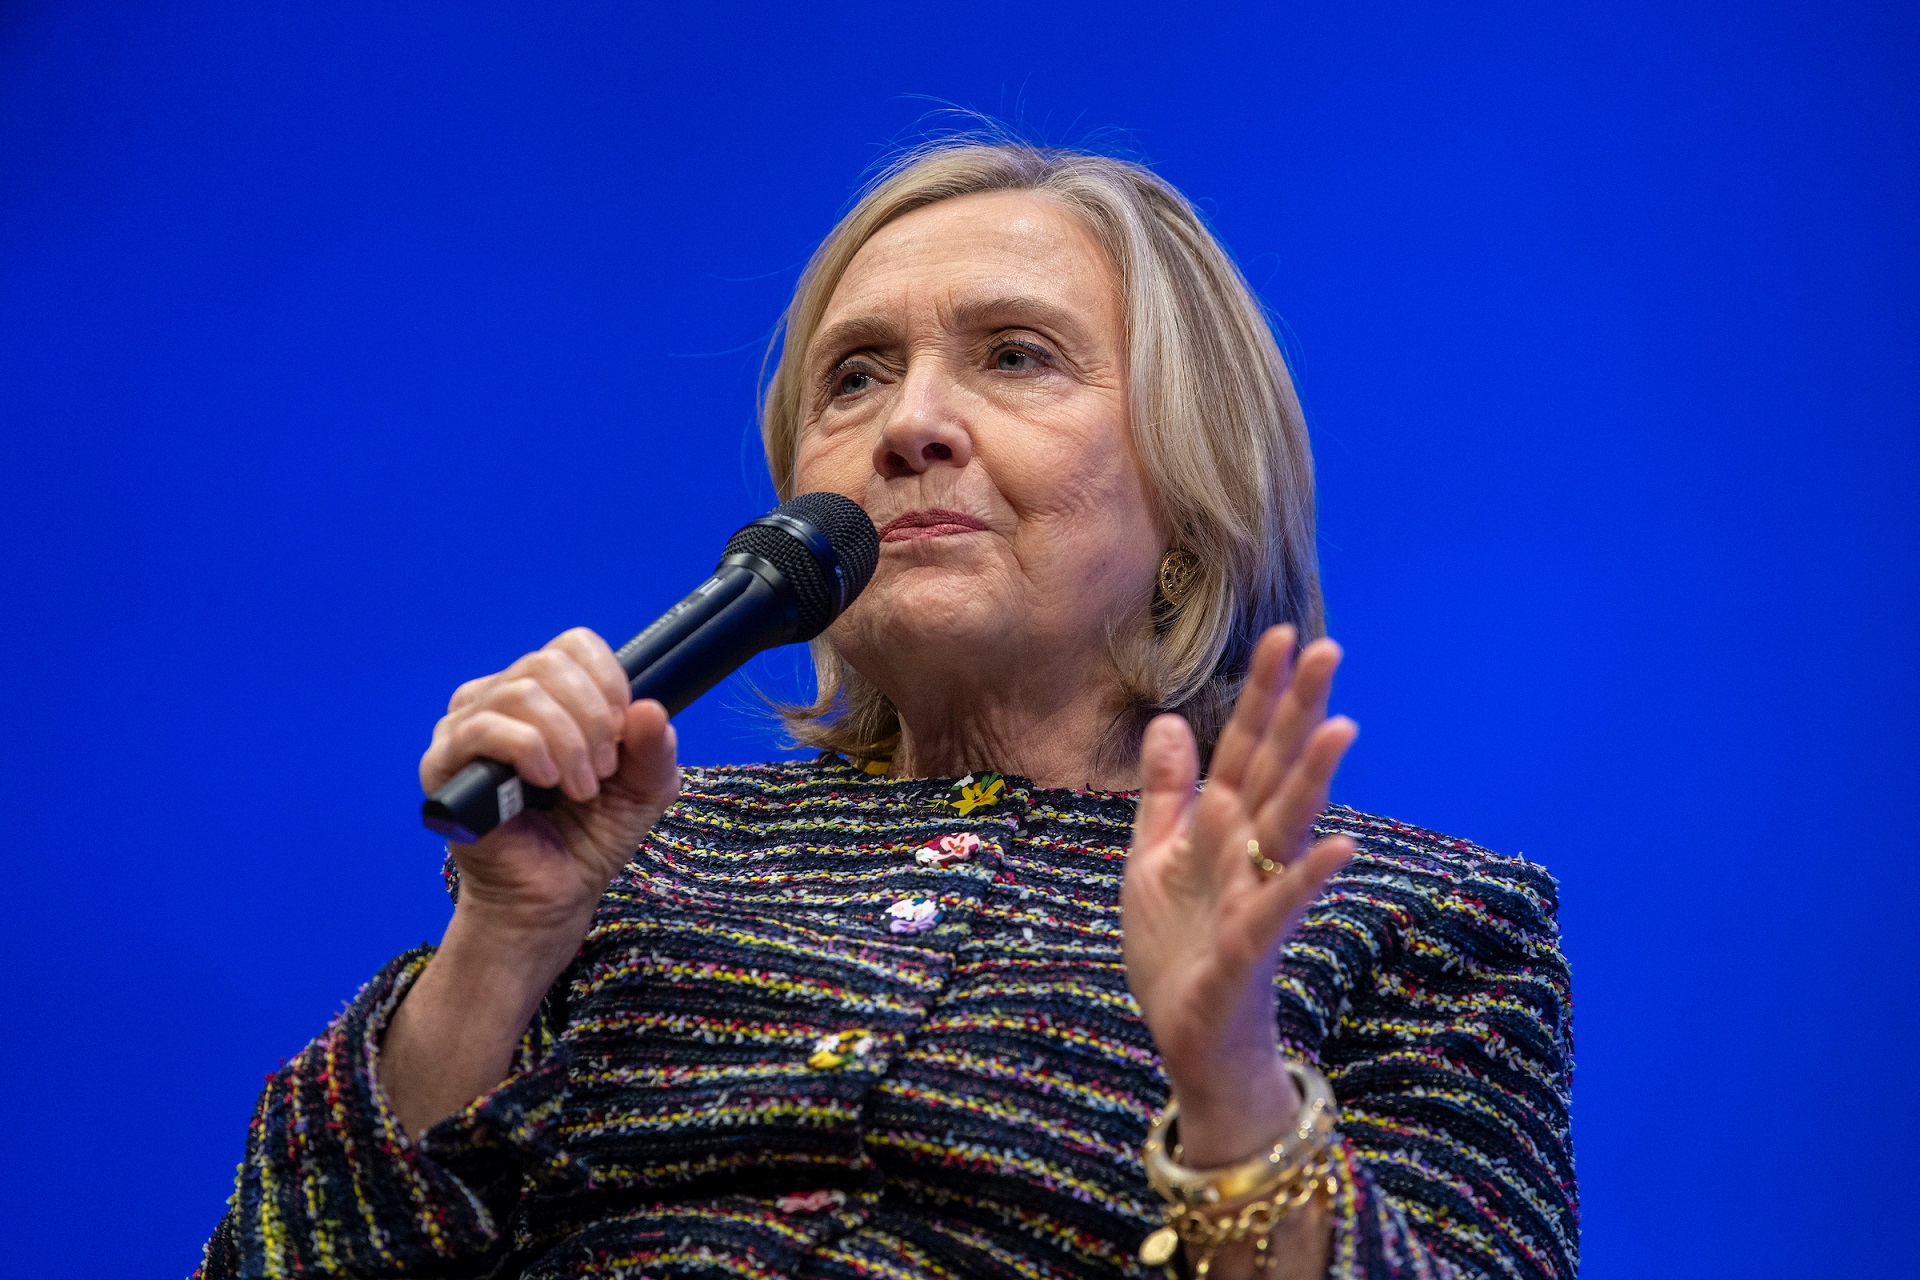 Hillary Rodham Clinton against a bright blue curtain, holding a microphone and speaking. She wears a patterned blazer.